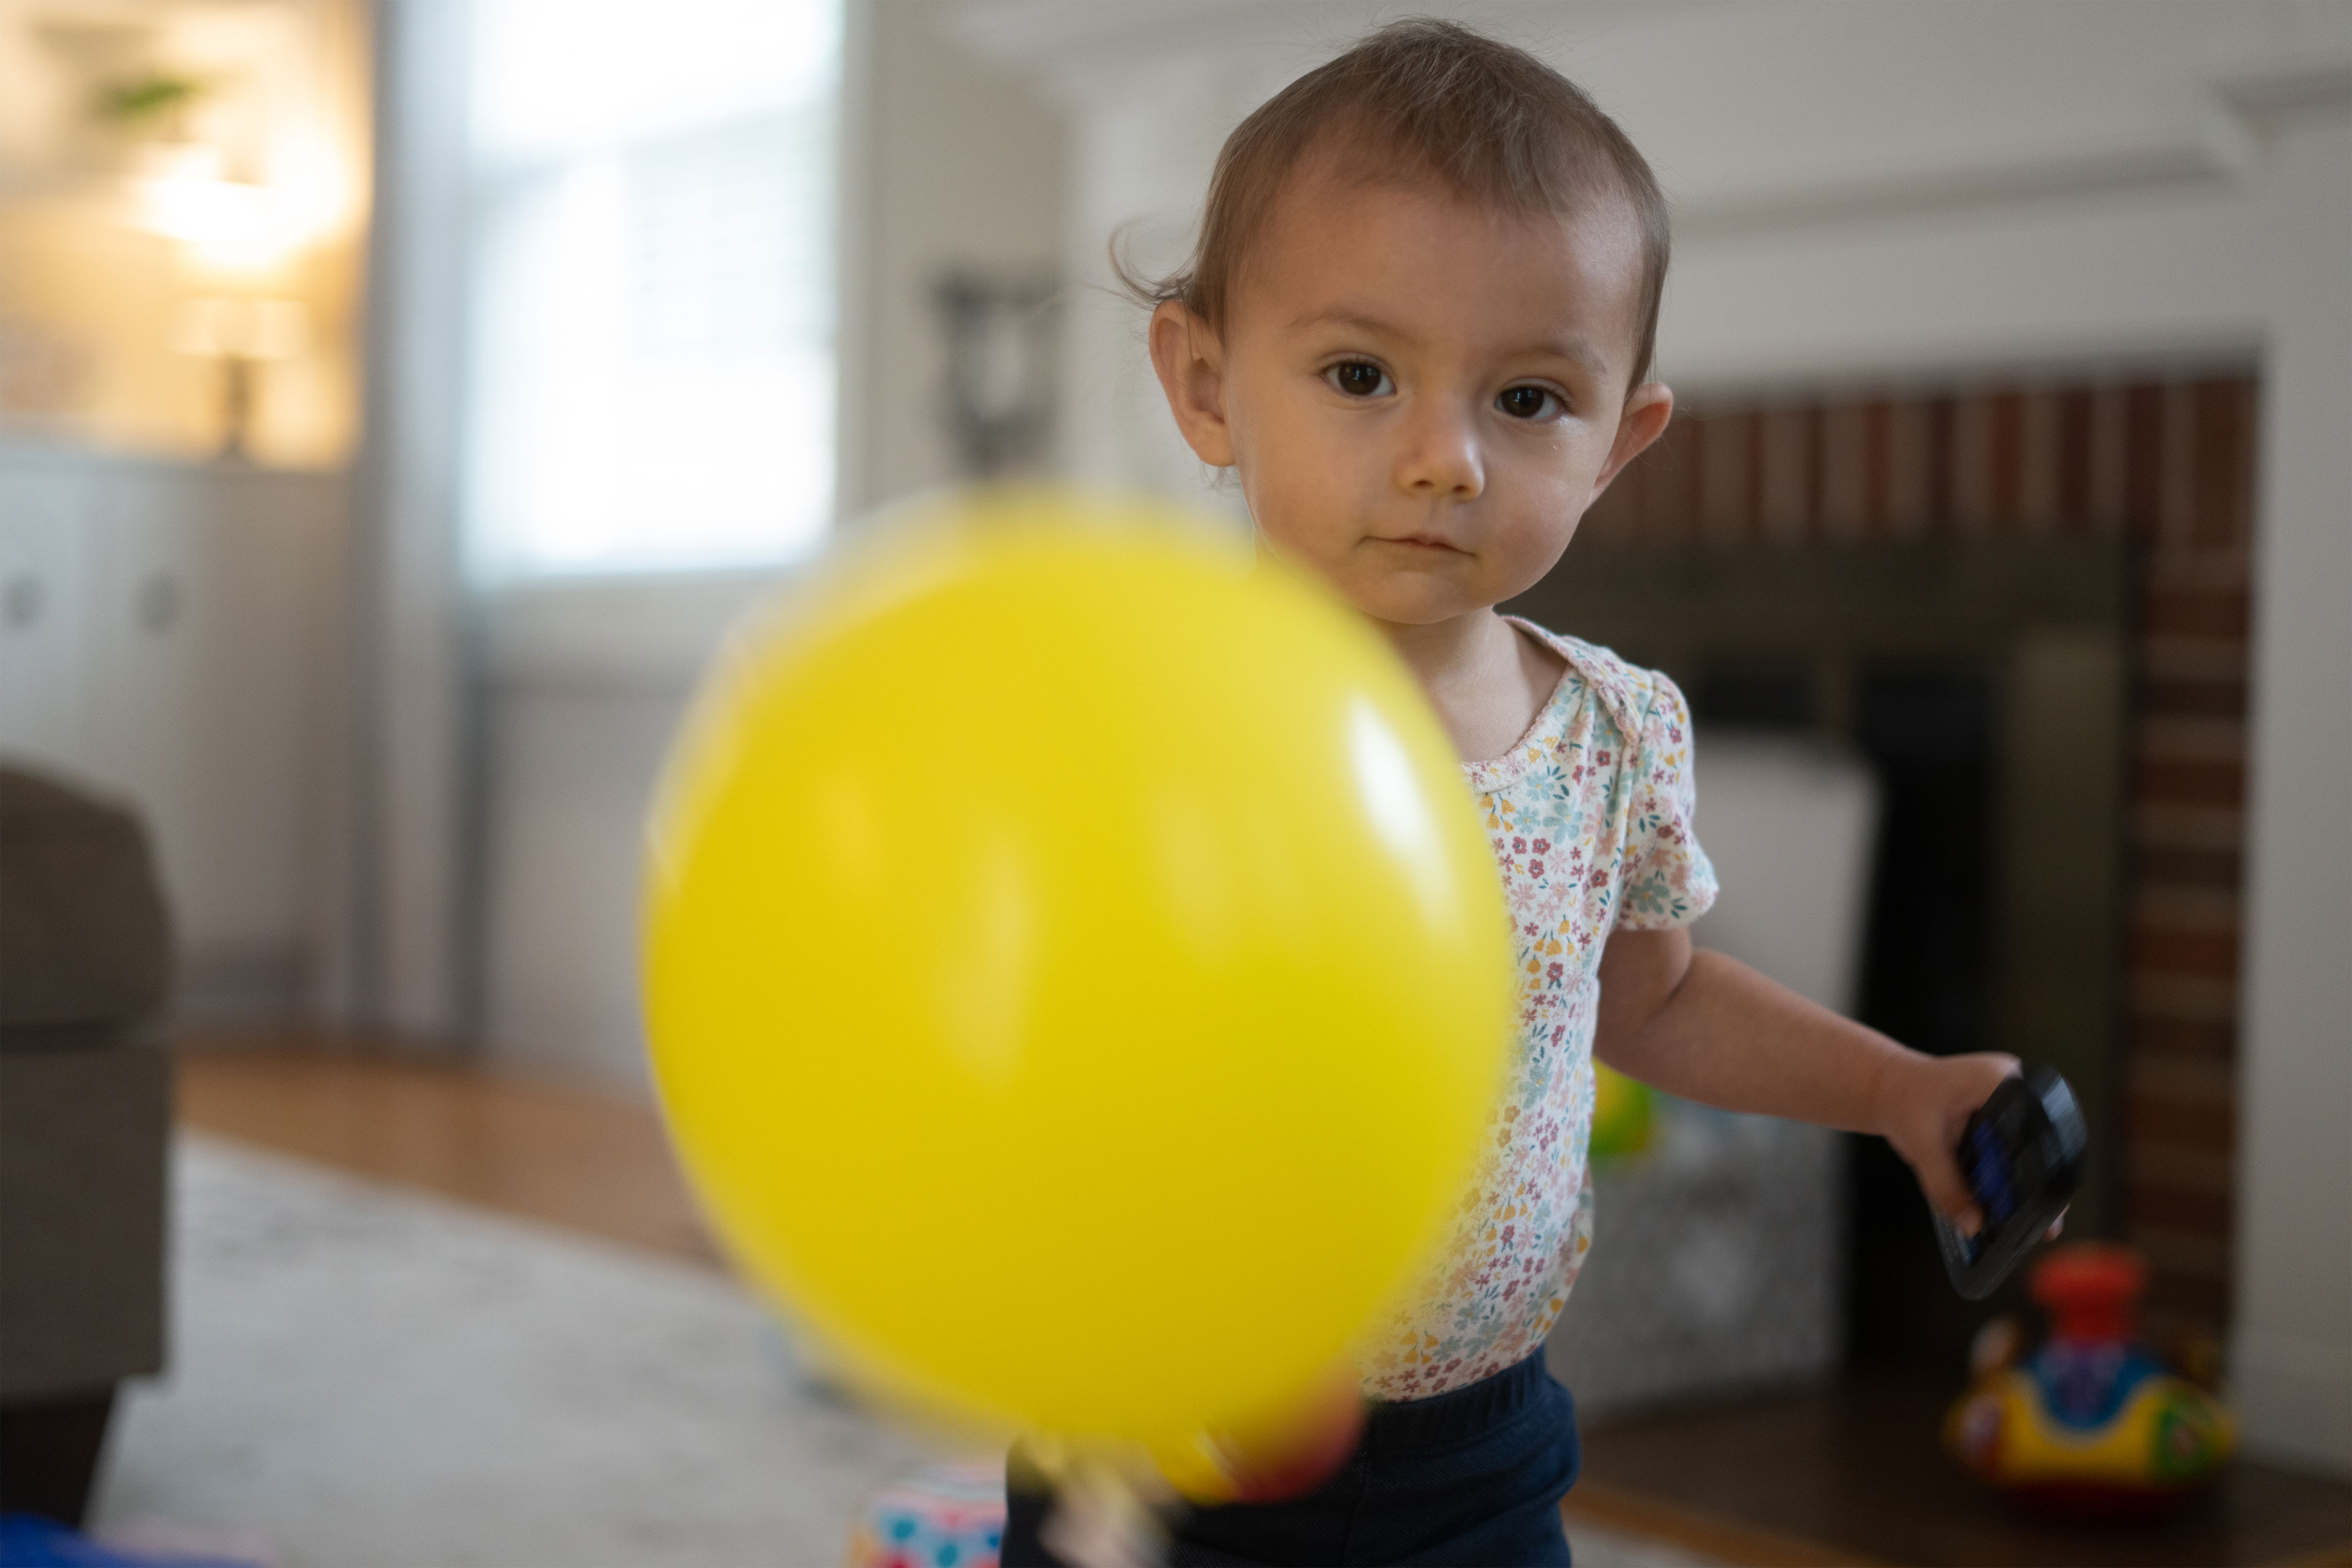 A girl about one year old looks at the camera and shows off a yellow balloon.